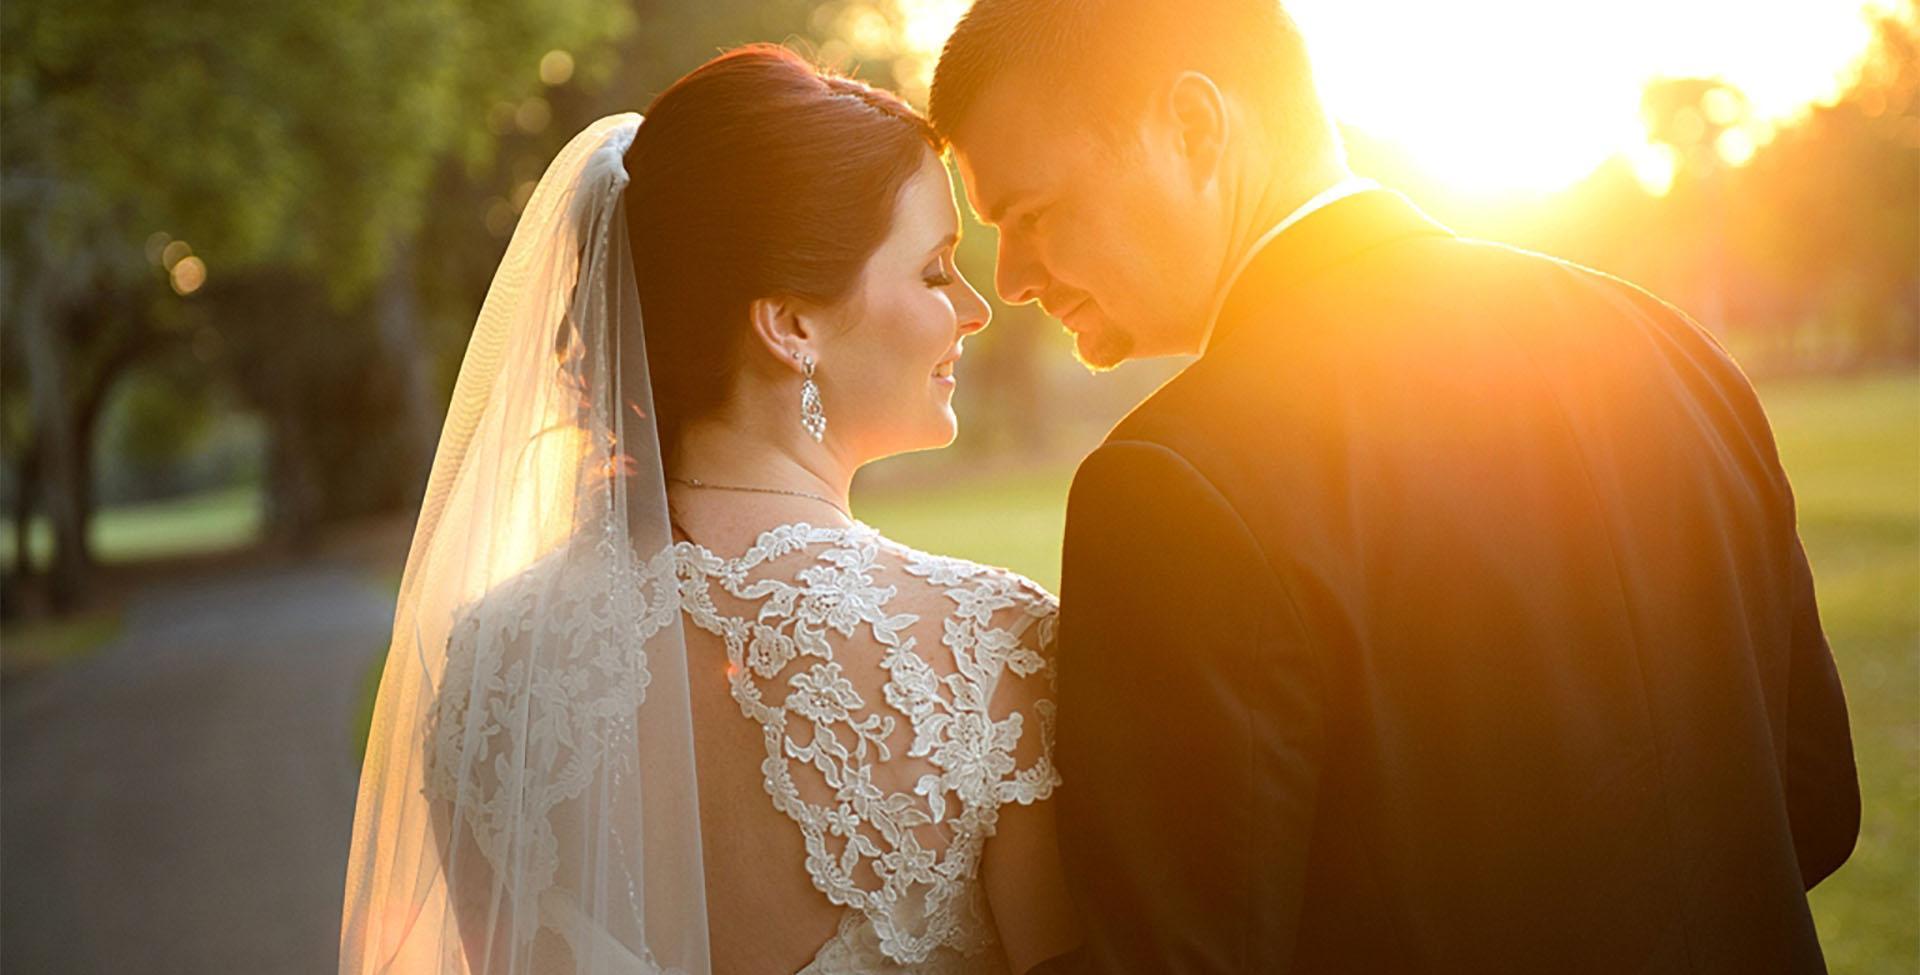 A bride and groom with a sunset behind them